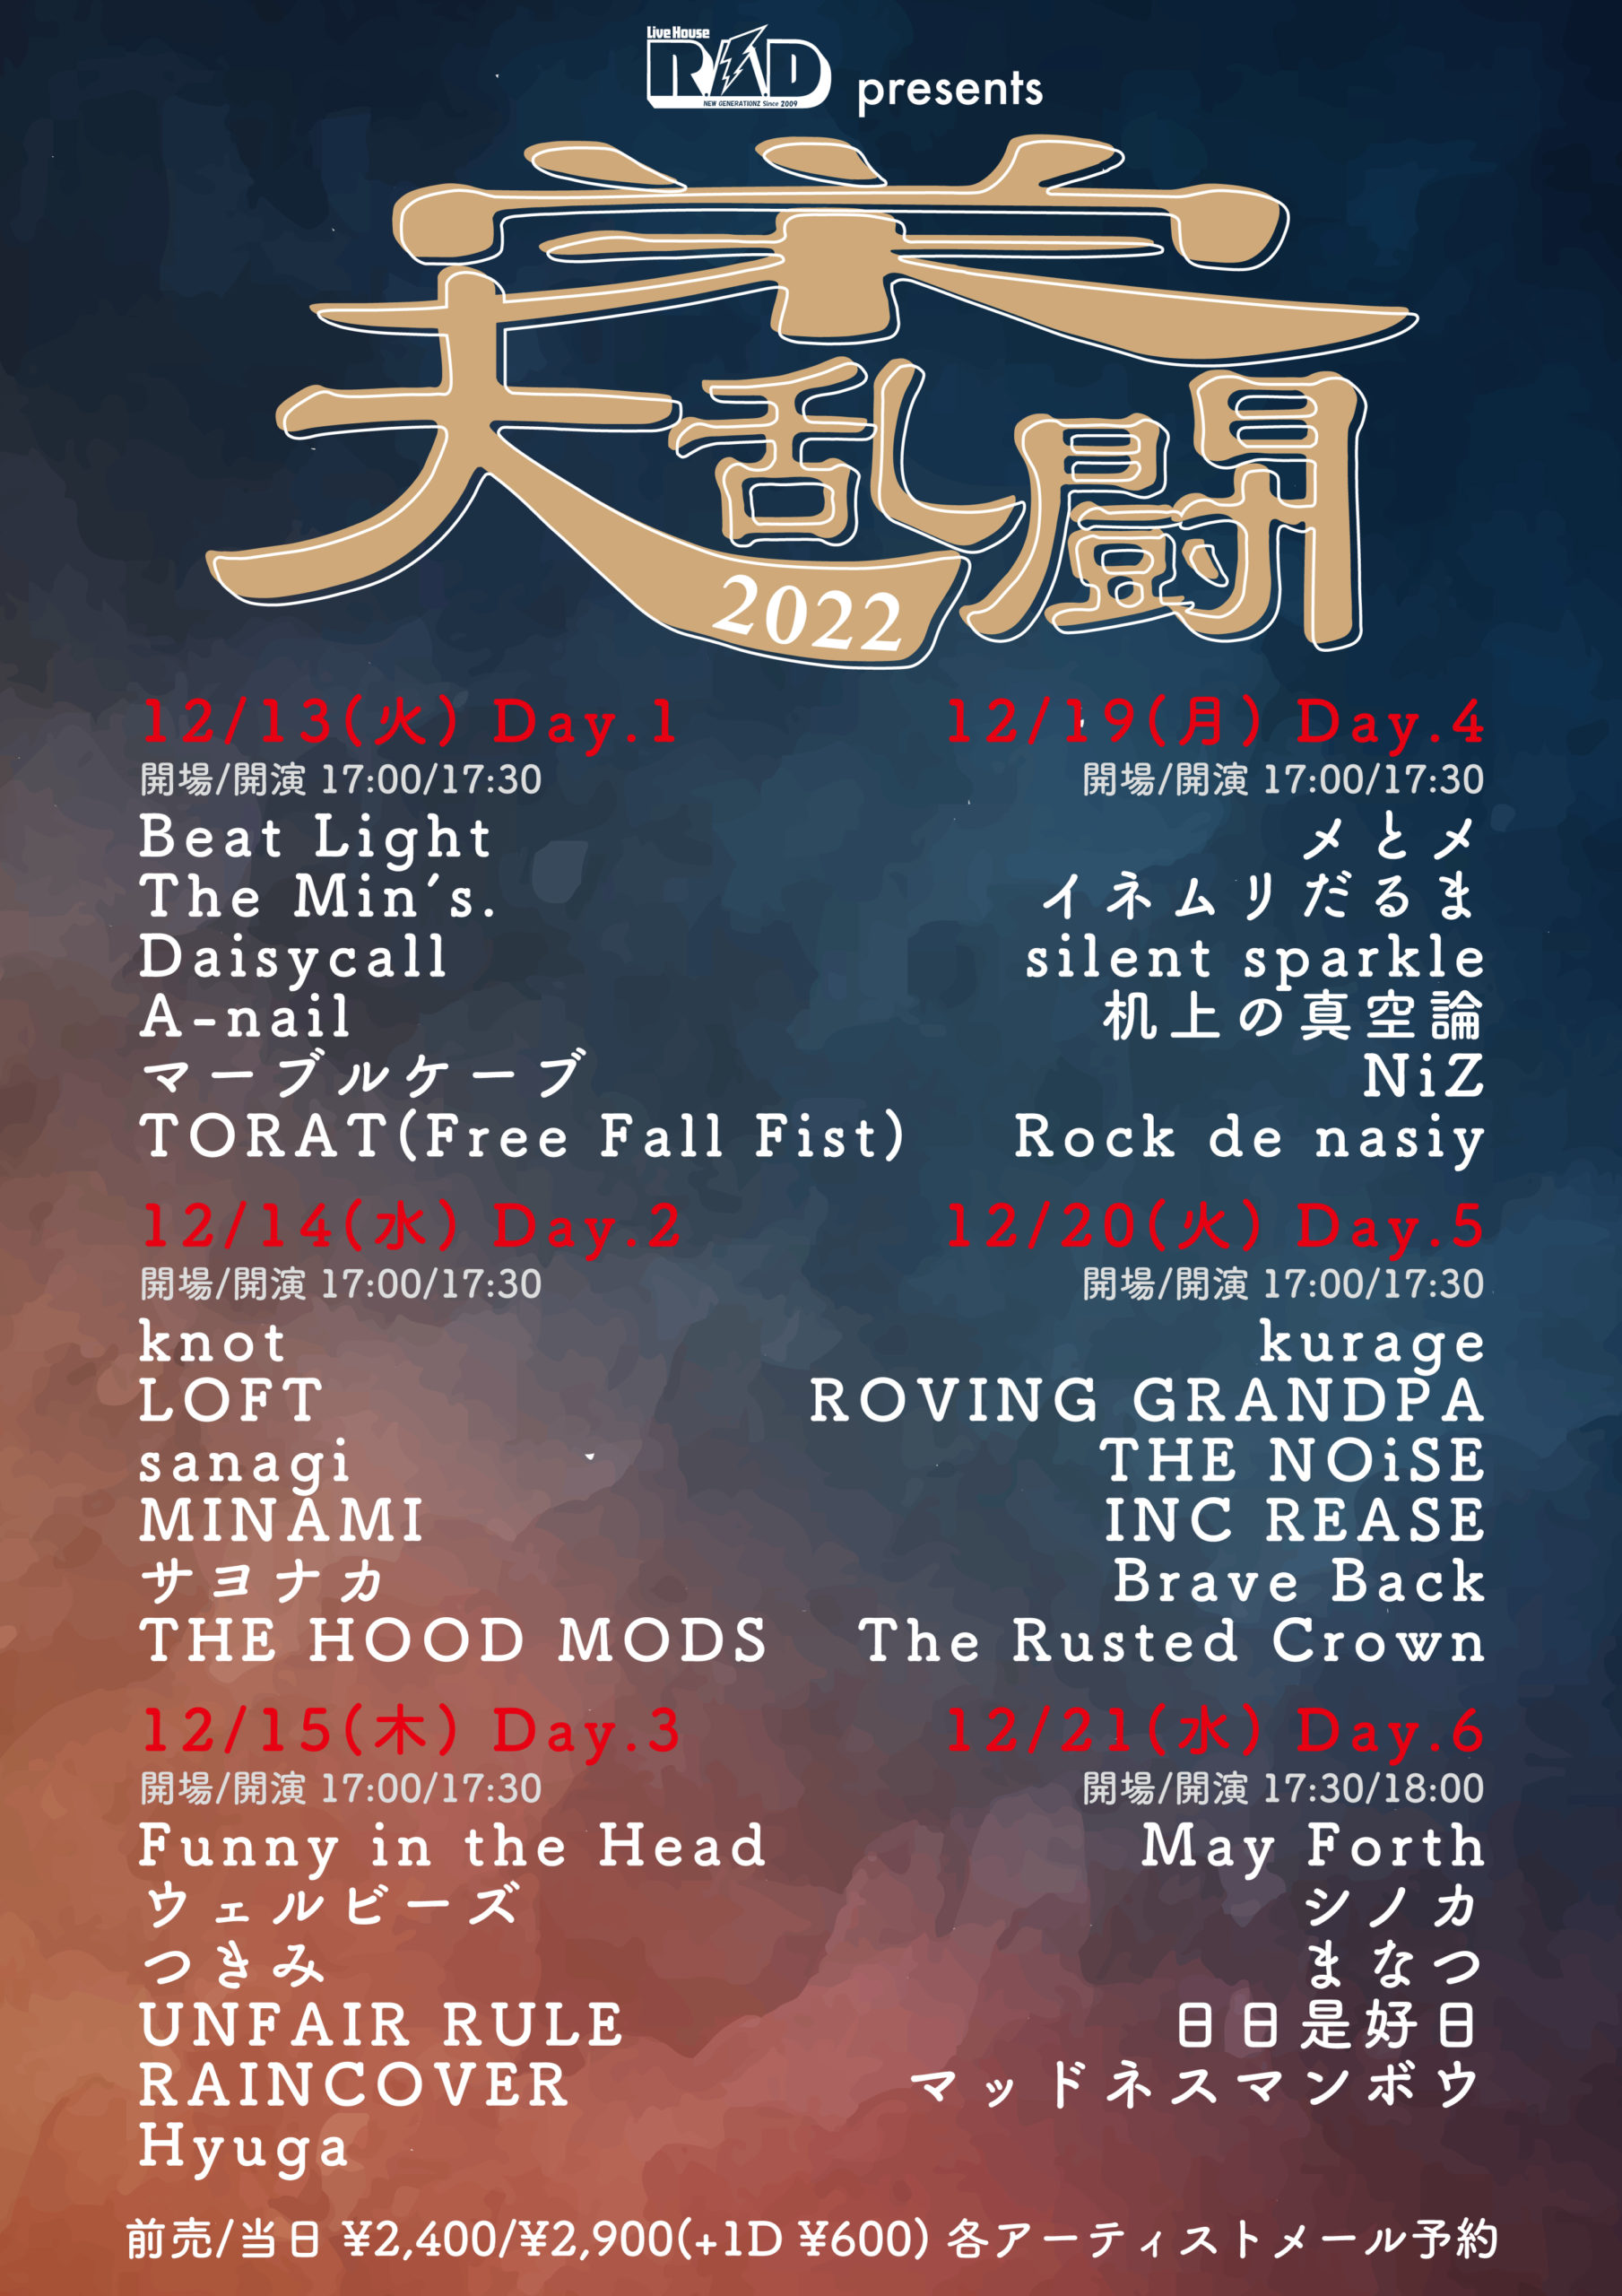 R.A.D presents 栄大乱闘2022 Day.2